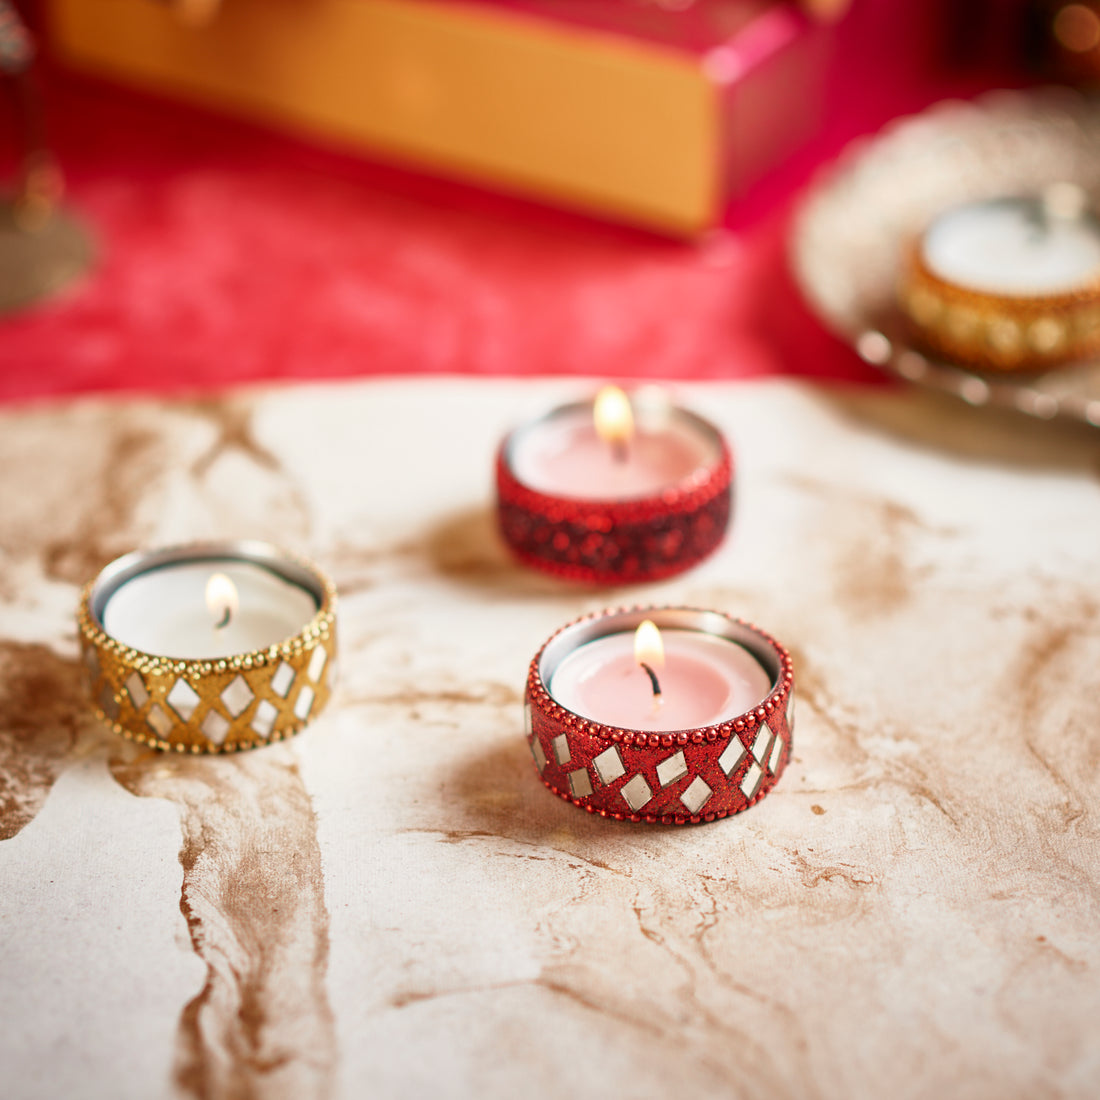 Illuminate Your Space with Vibrant Handmade Diyas - The Perfect Decorative Tea Light Holders for Any Occasion!